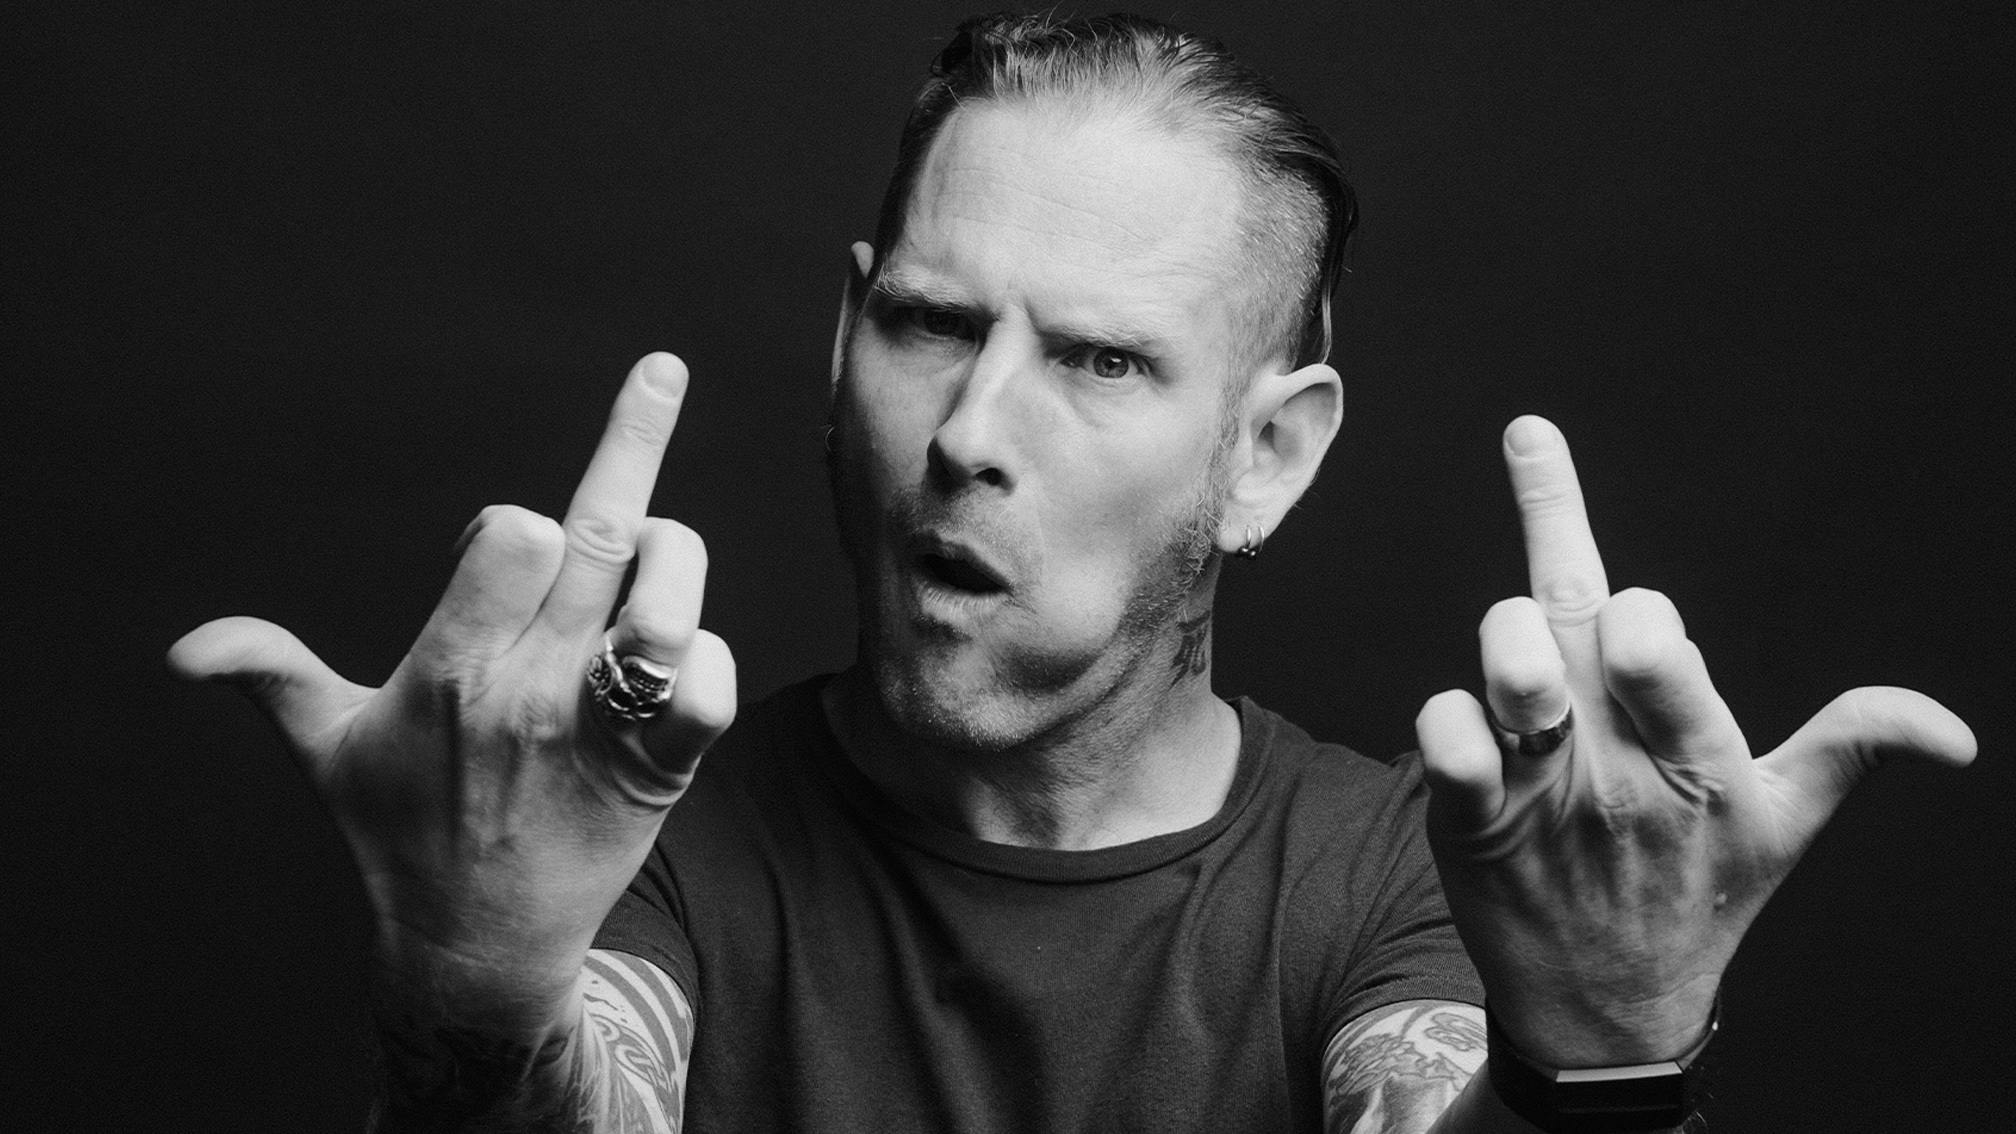 Listen to Corey Taylor covering Metallica’s Holier Than Thou